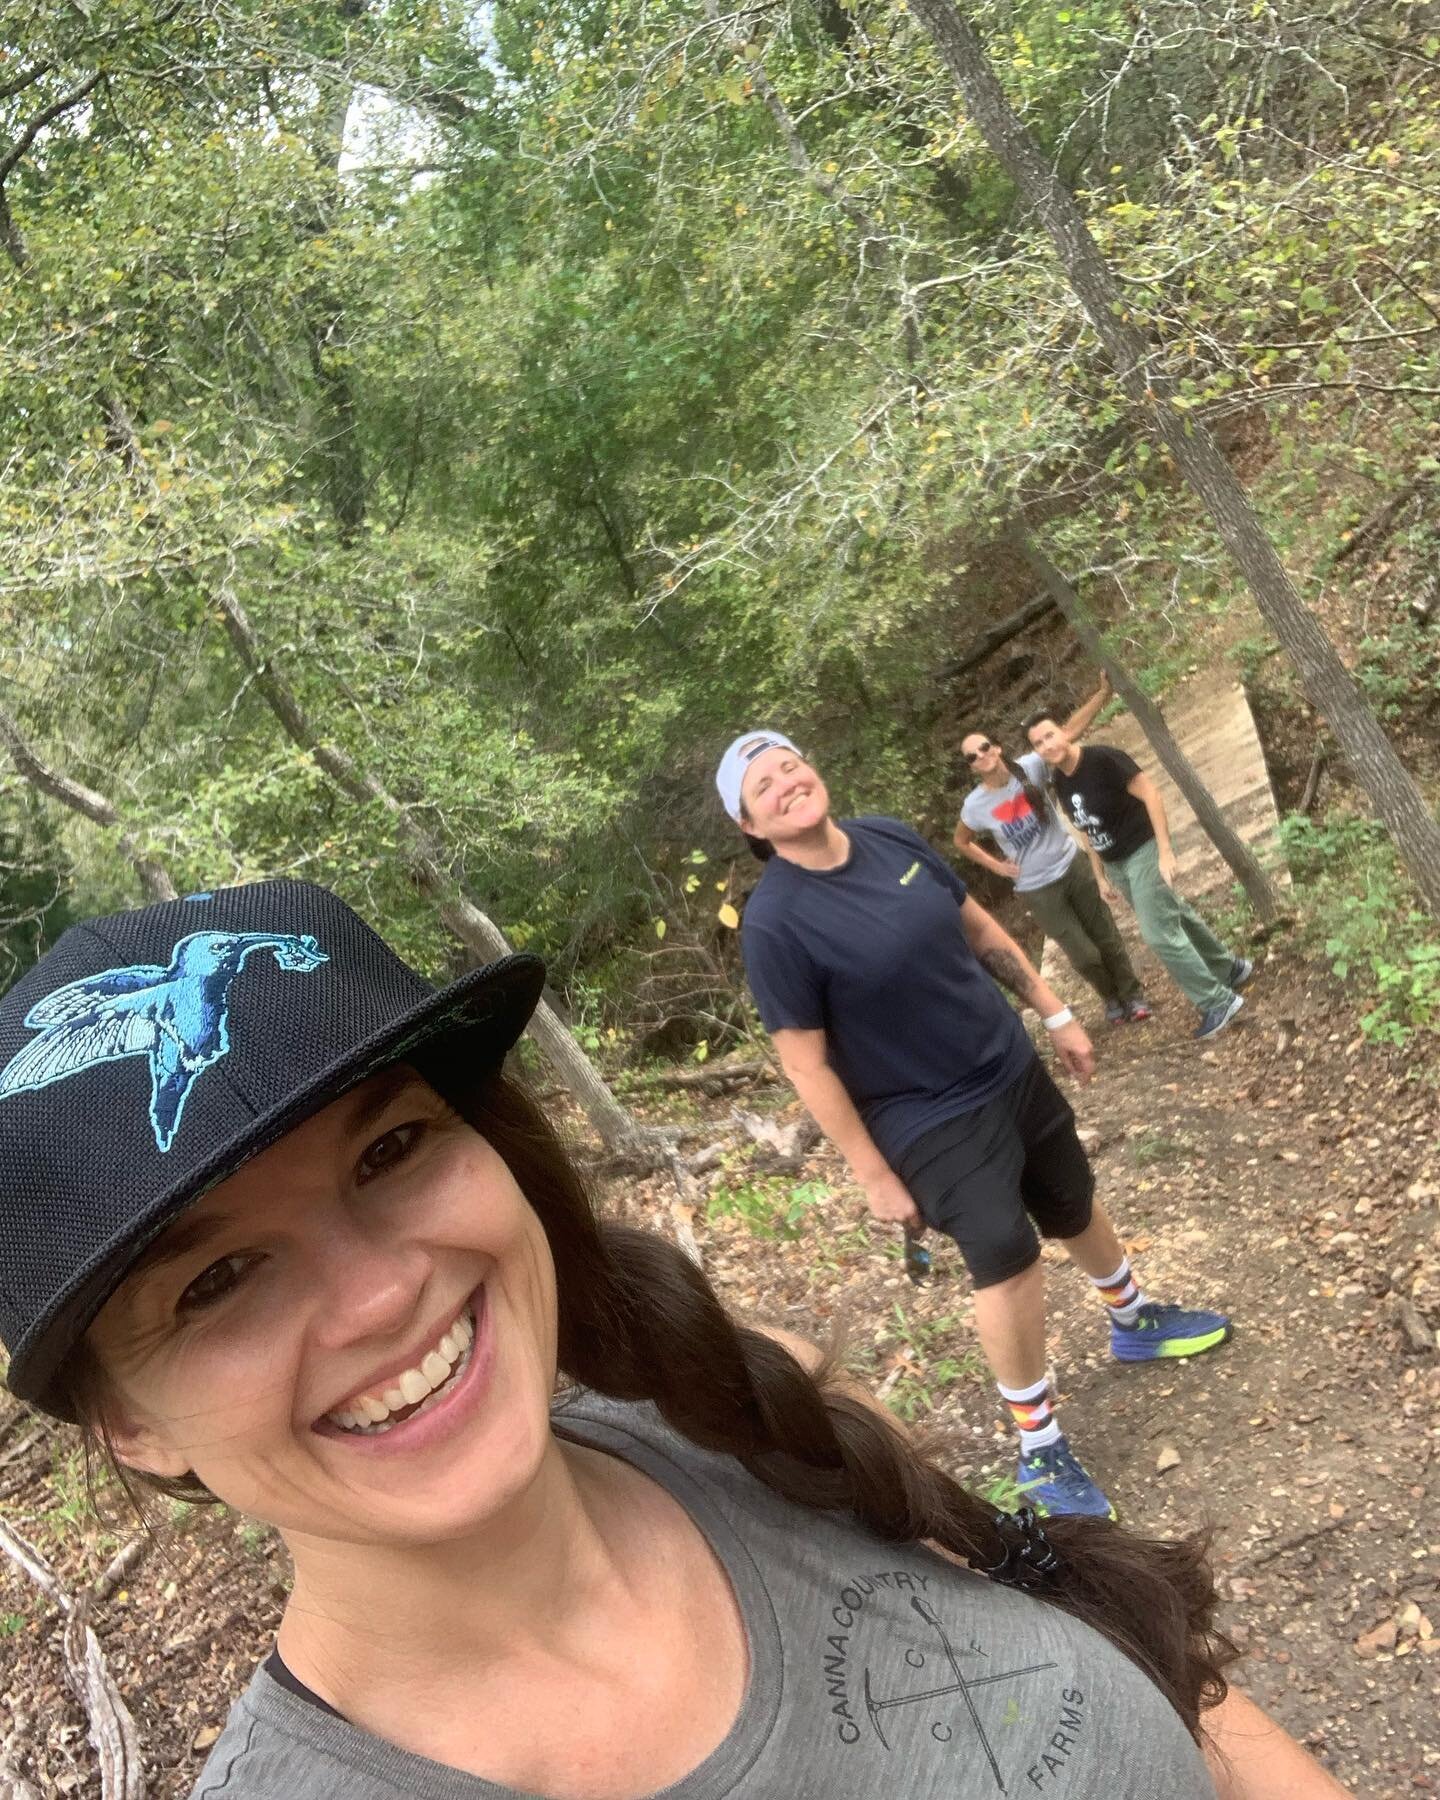 I&rsquo;ve really been missing my NorCal hikes. So this morning I finally checked out some new-to-me TX trails with old friends. 🥾💚☀️I didn&rsquo;t realize how bad i needed to reconnect with nature. Get casually baked and get outside! 😌

#casually